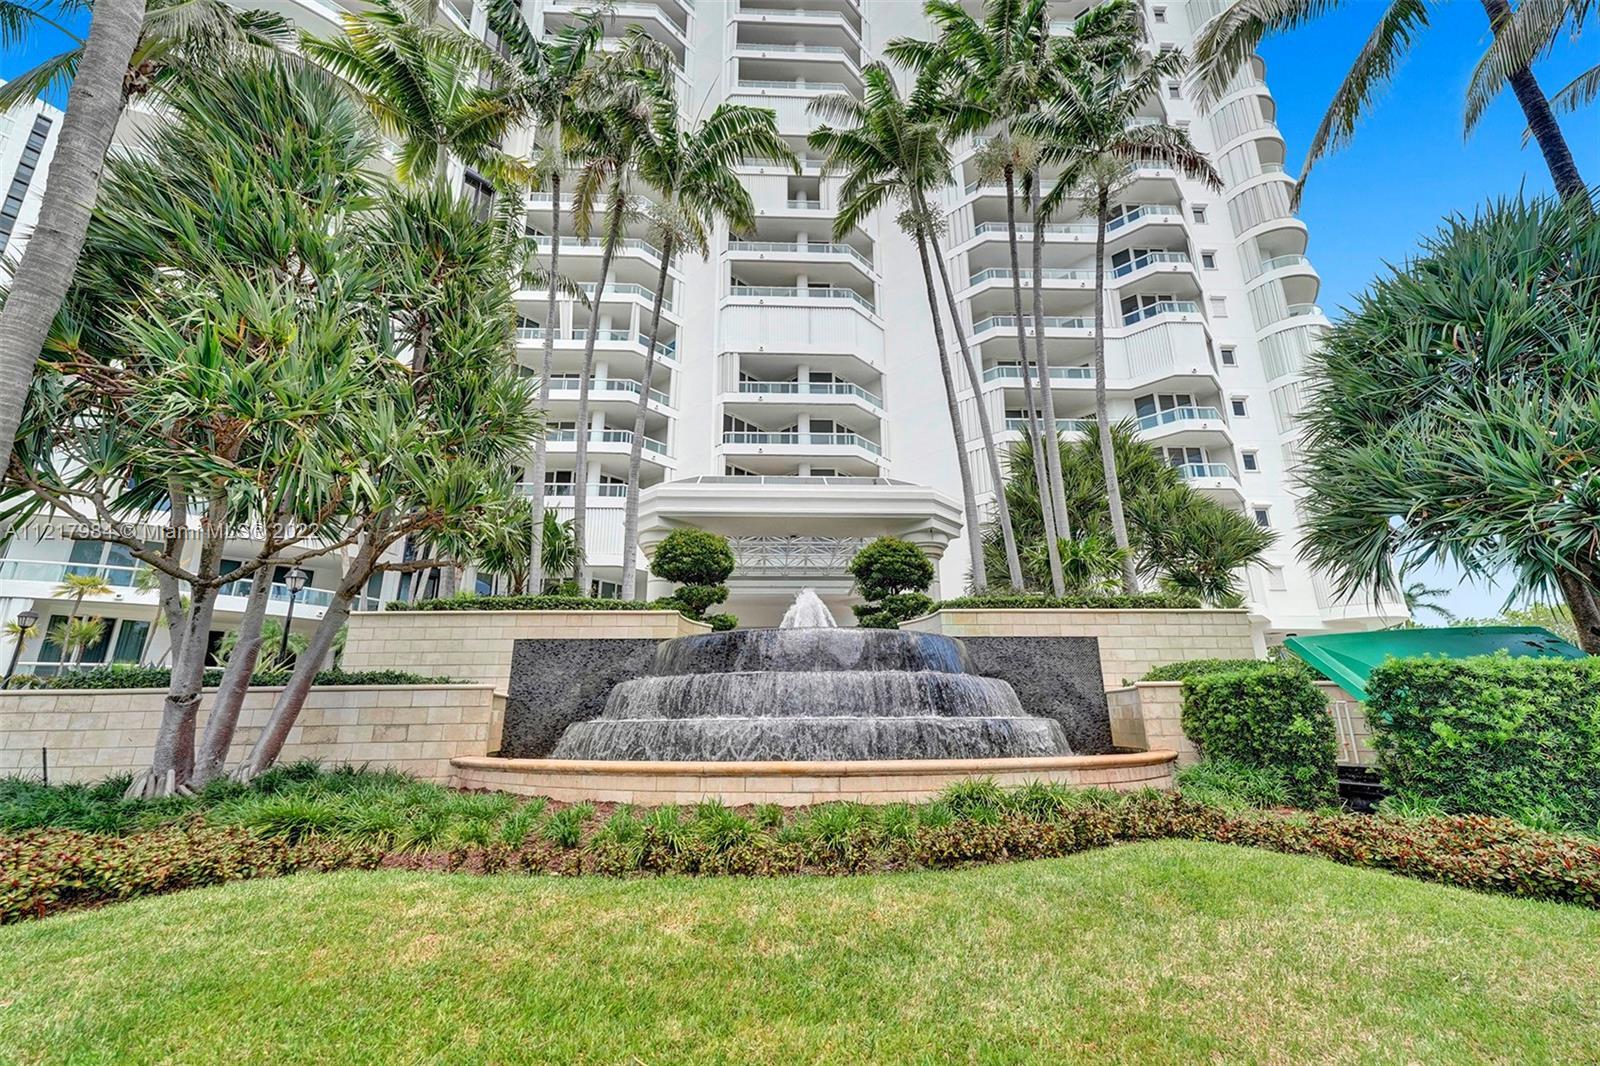 PRIVATE ELEVATOR OPENS INTO THIS FABULOUS CONDO AT THE DESIRABLE THE POINT COMMUNITY. SPACIOUS 2690 